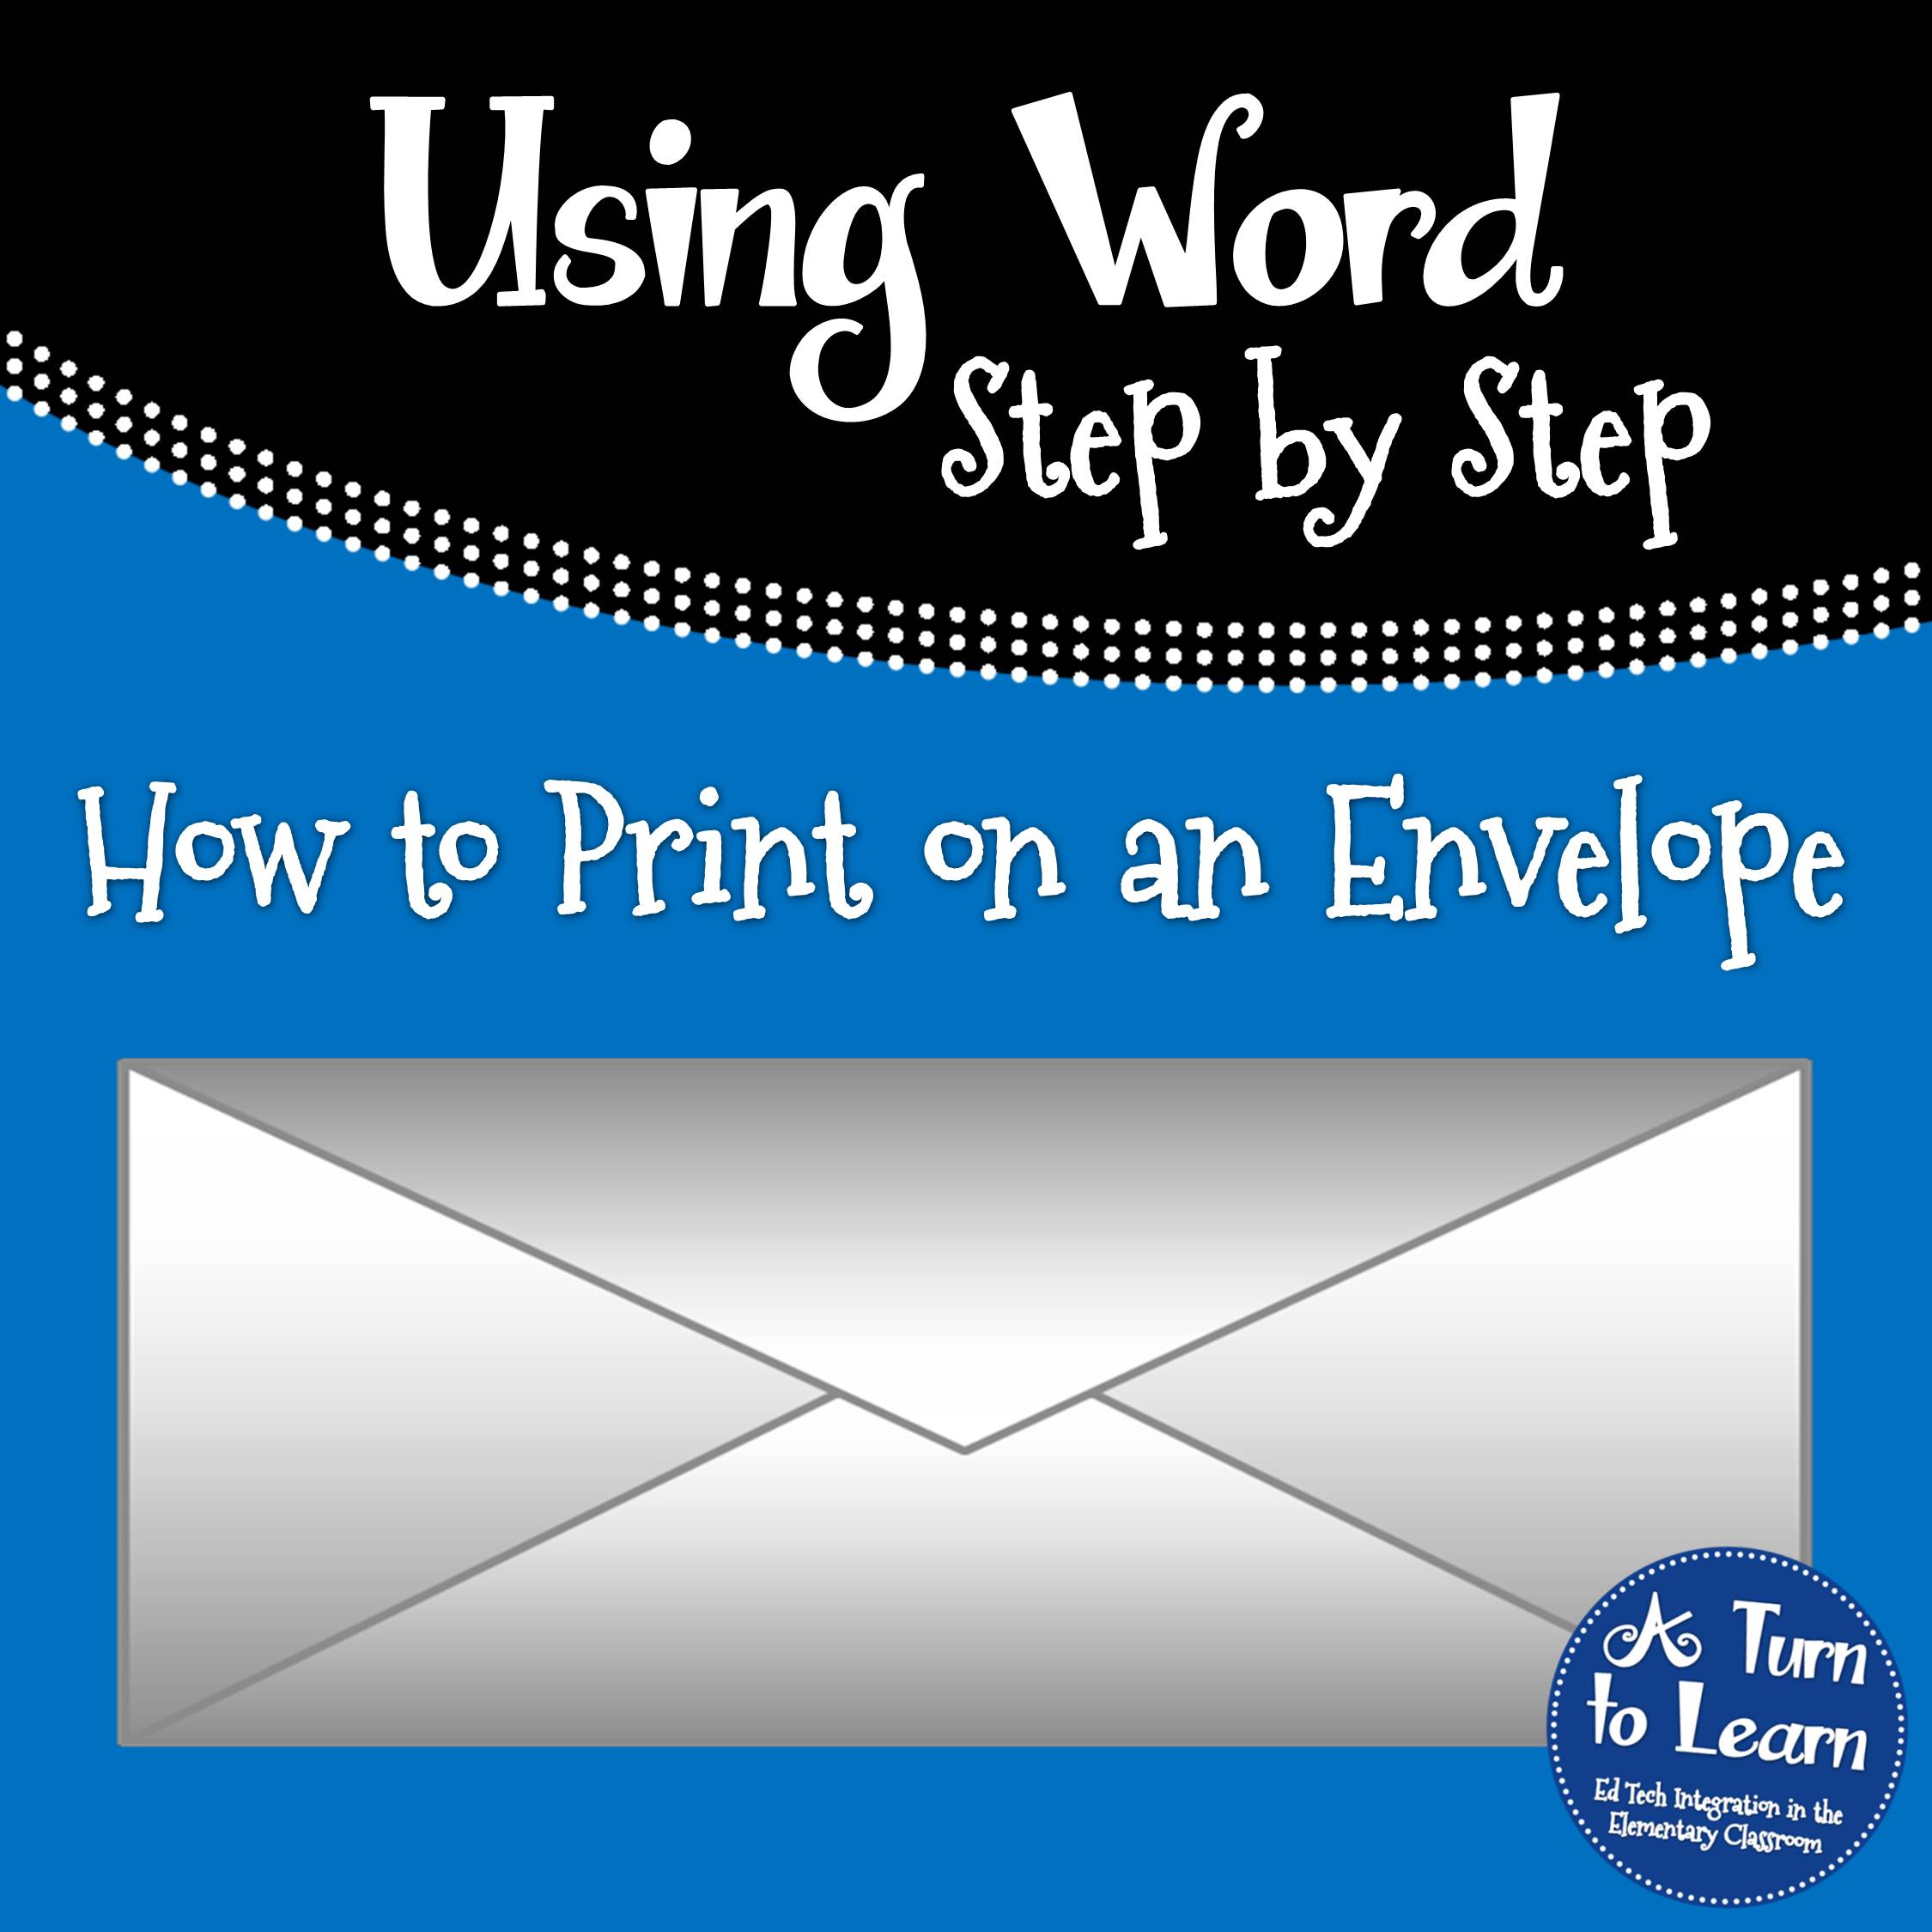 How to Print on an Envelope